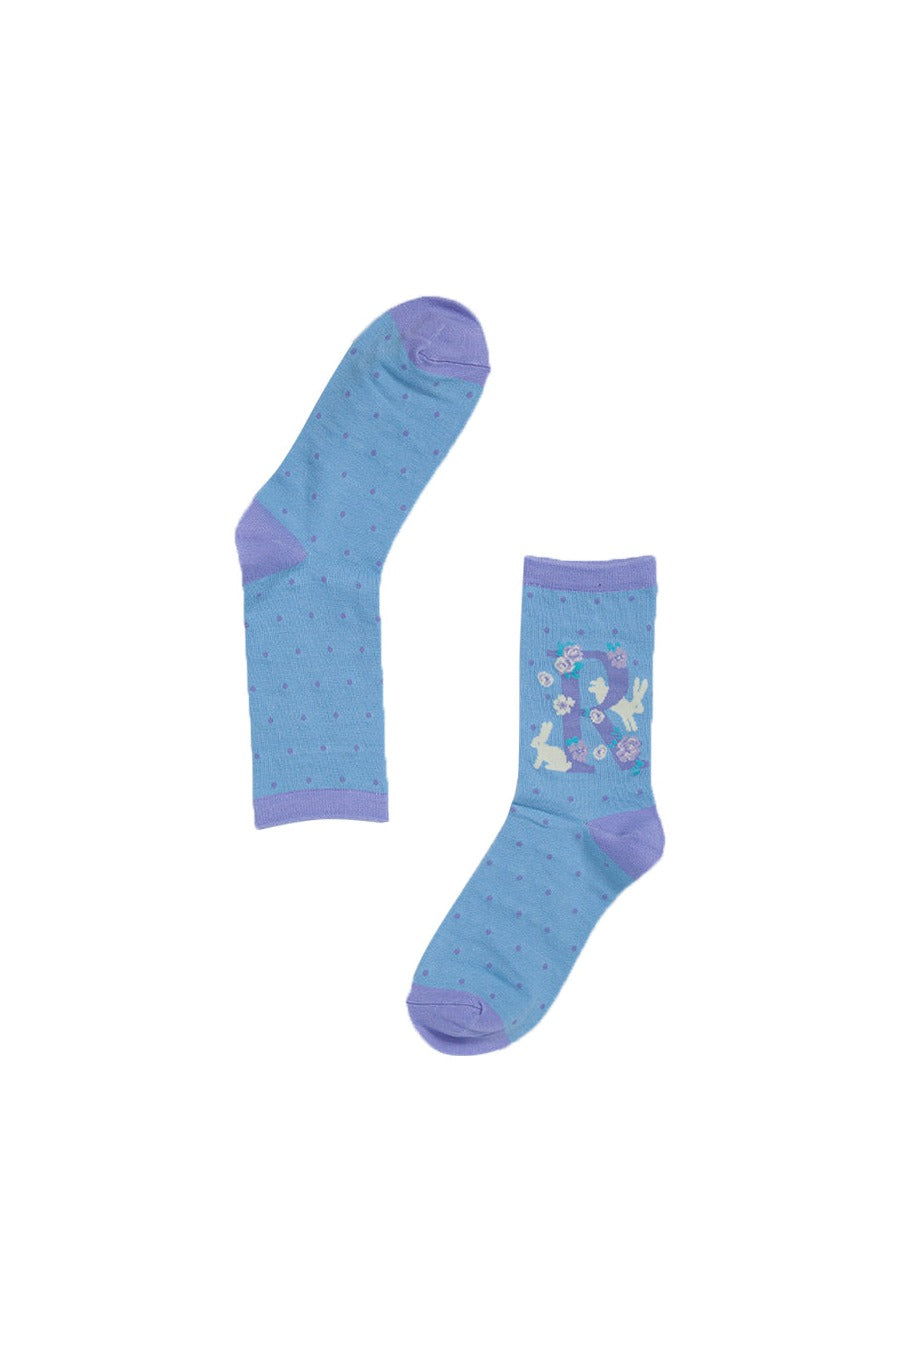 blue, lilac bamboo socks with the initial R